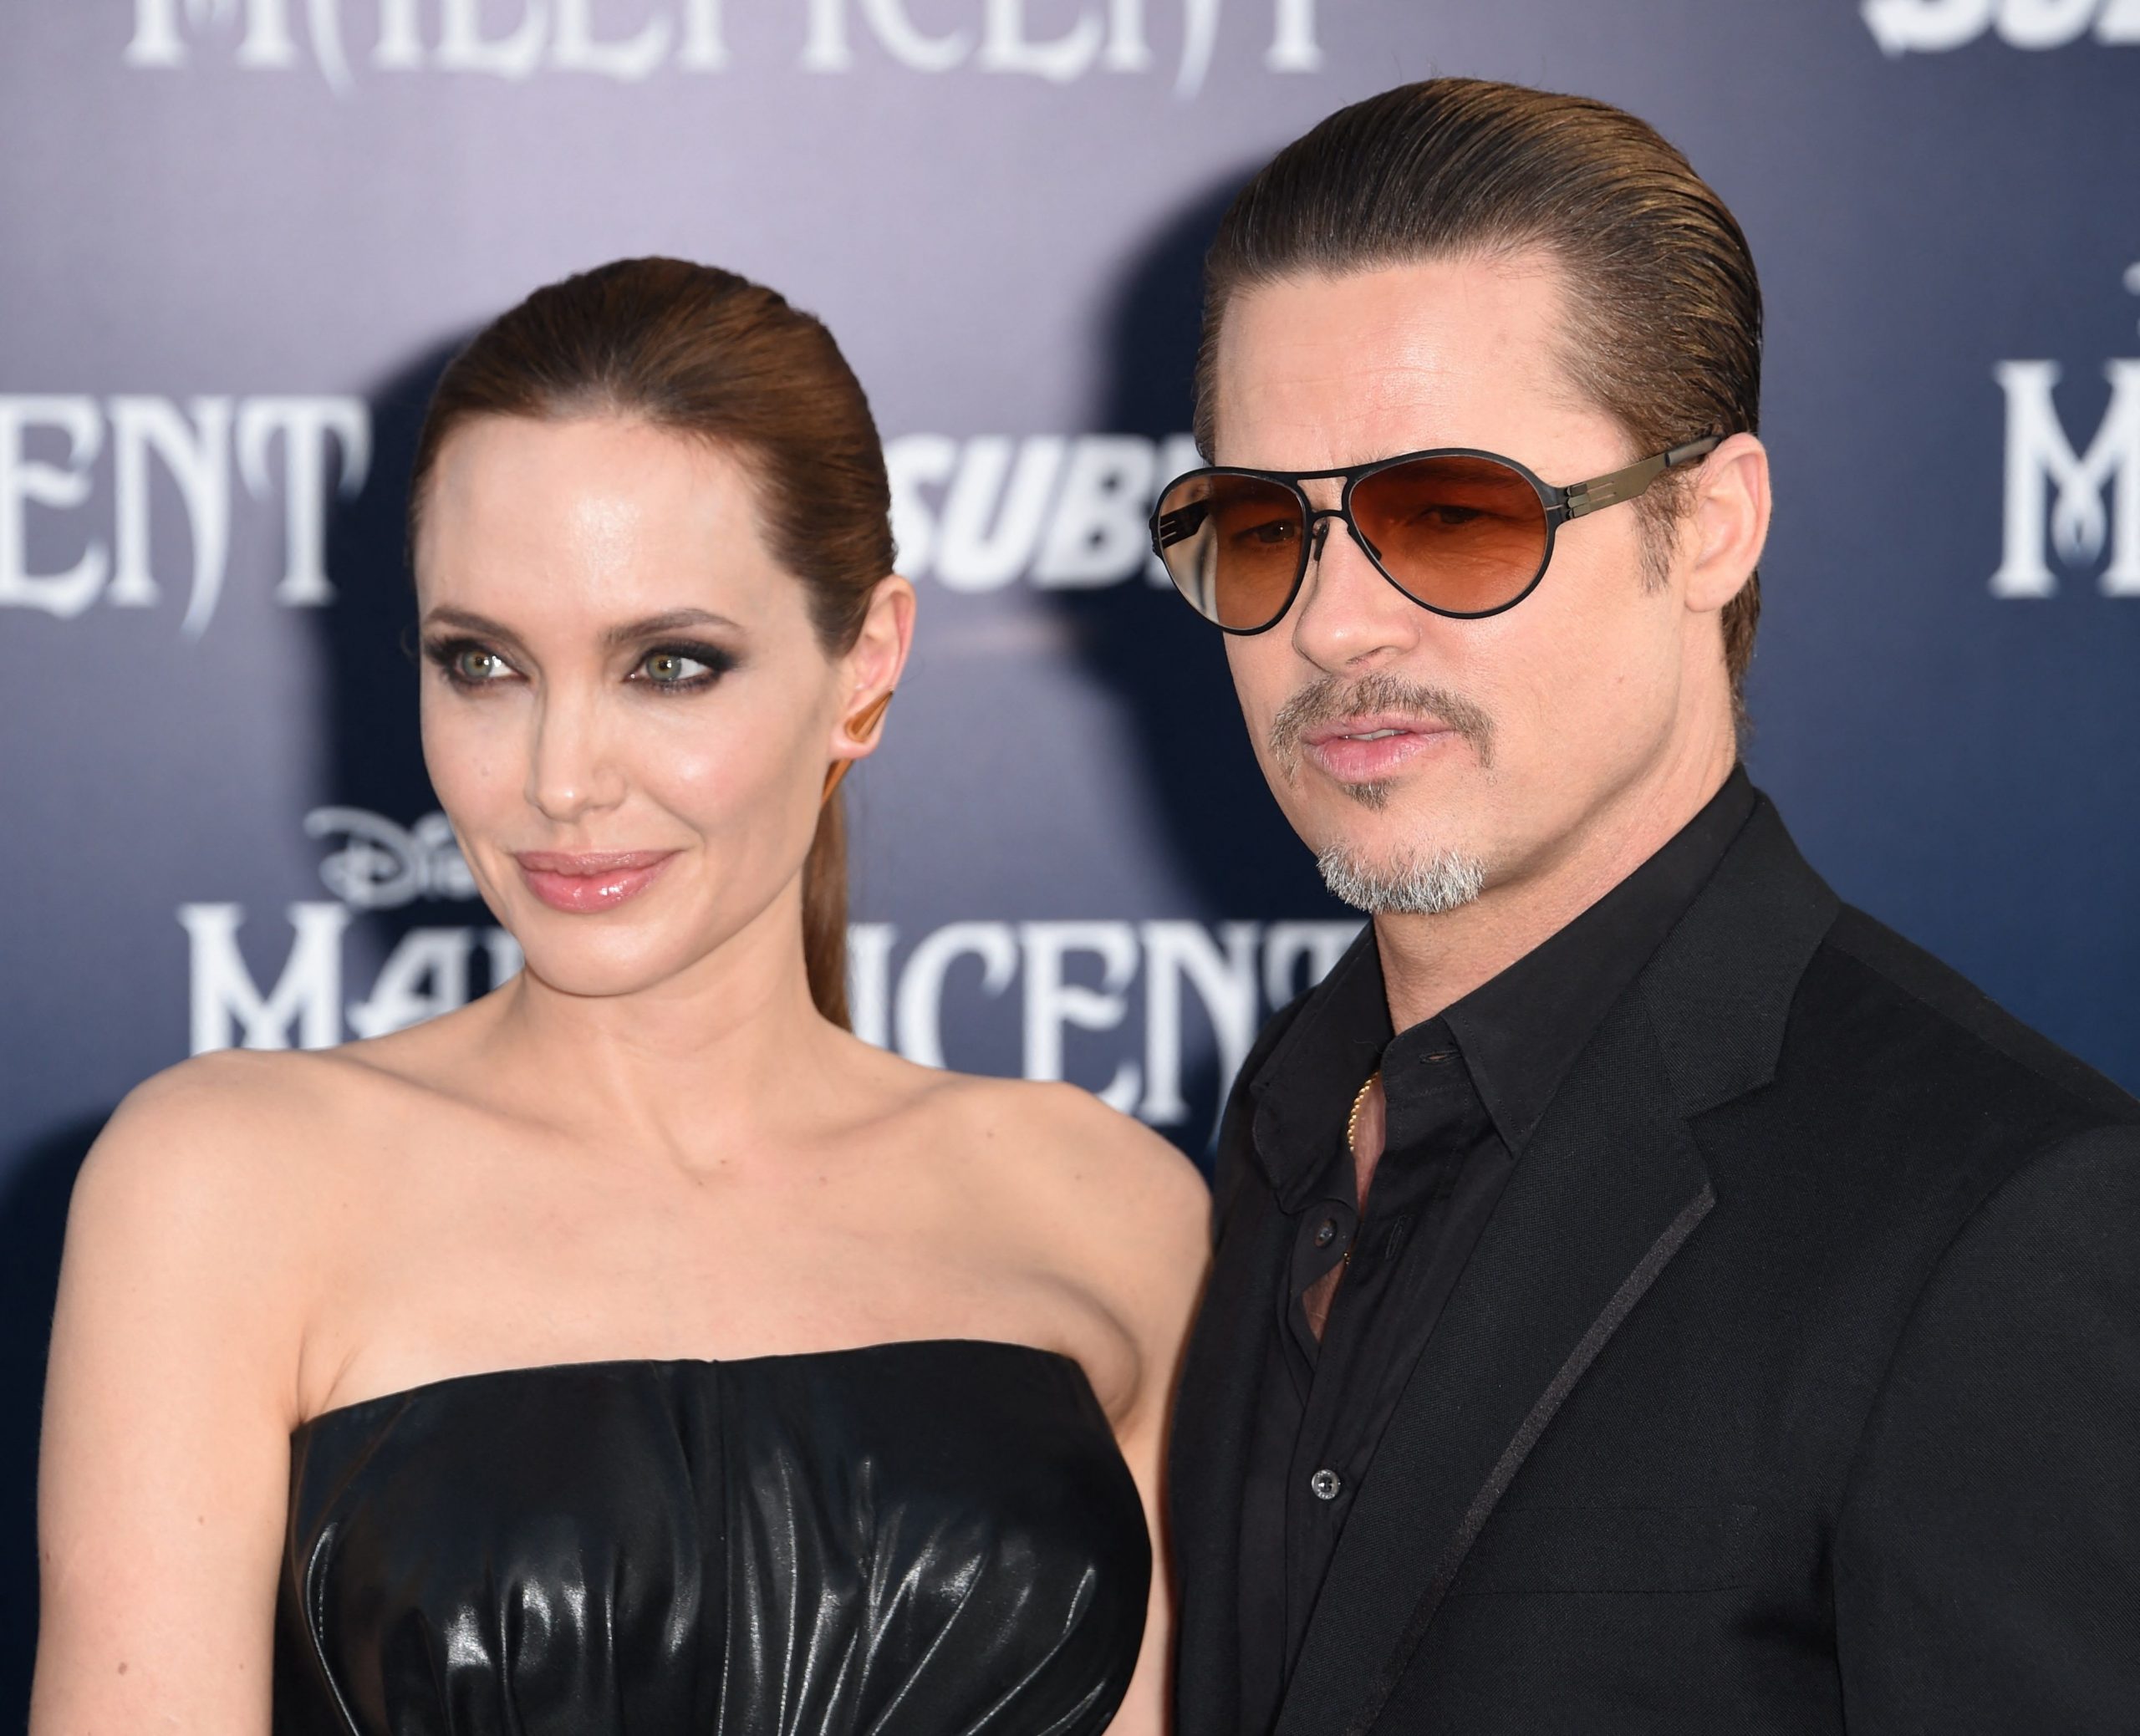 Angelina Jolie accuses Brad Pitt of domestic violence, claims she has ‘proof’